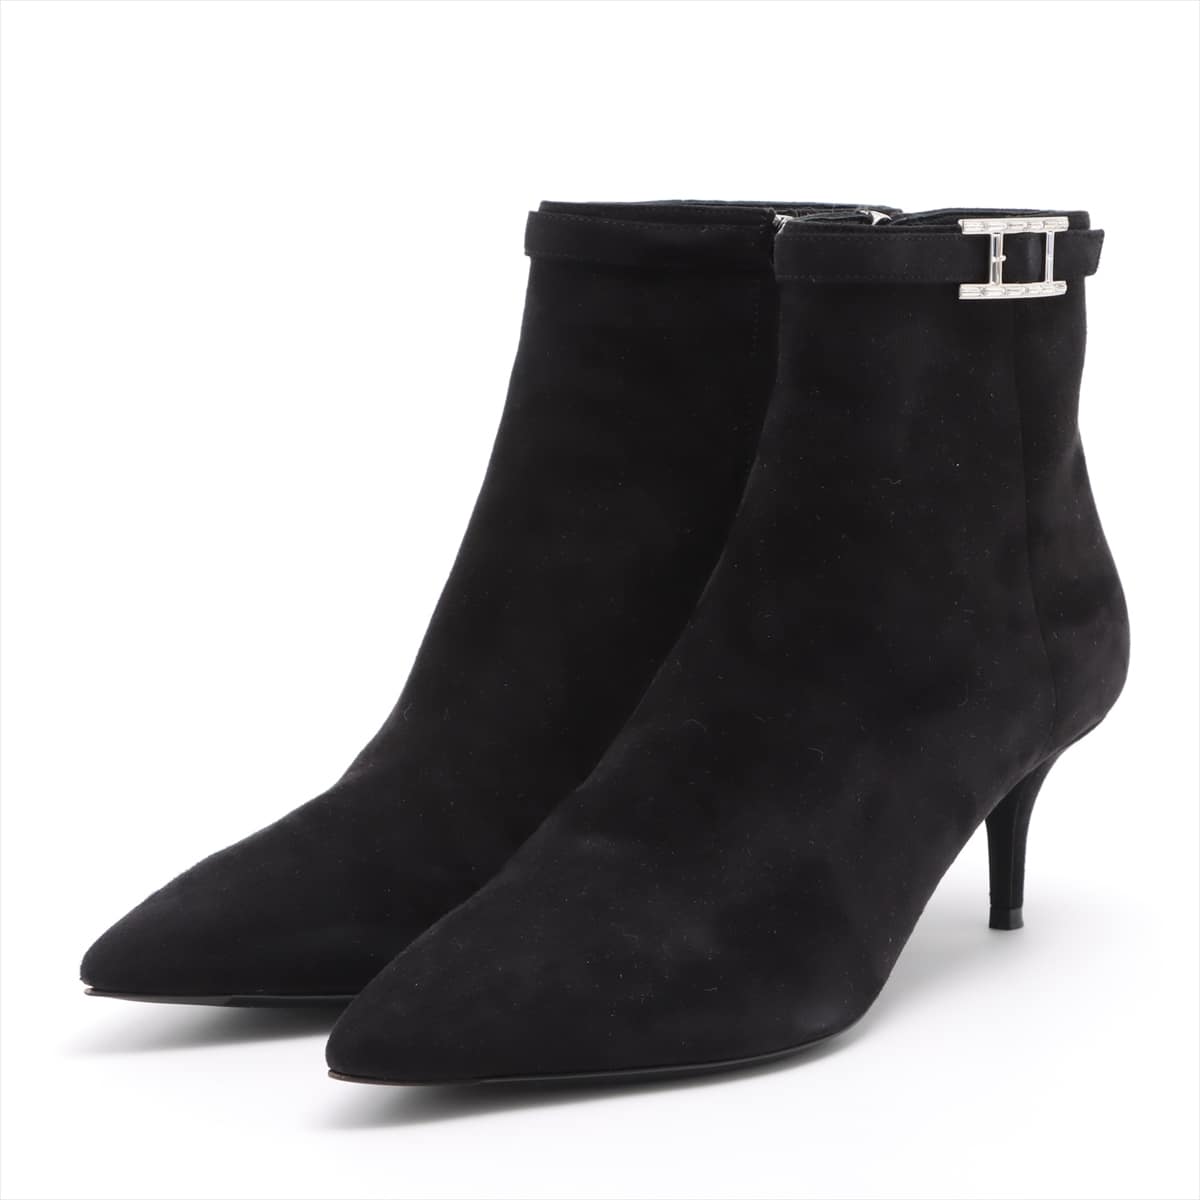 Hermès Suede Short Boots 38 1/2 Ladies' Black blanche Buckle There is a lift change